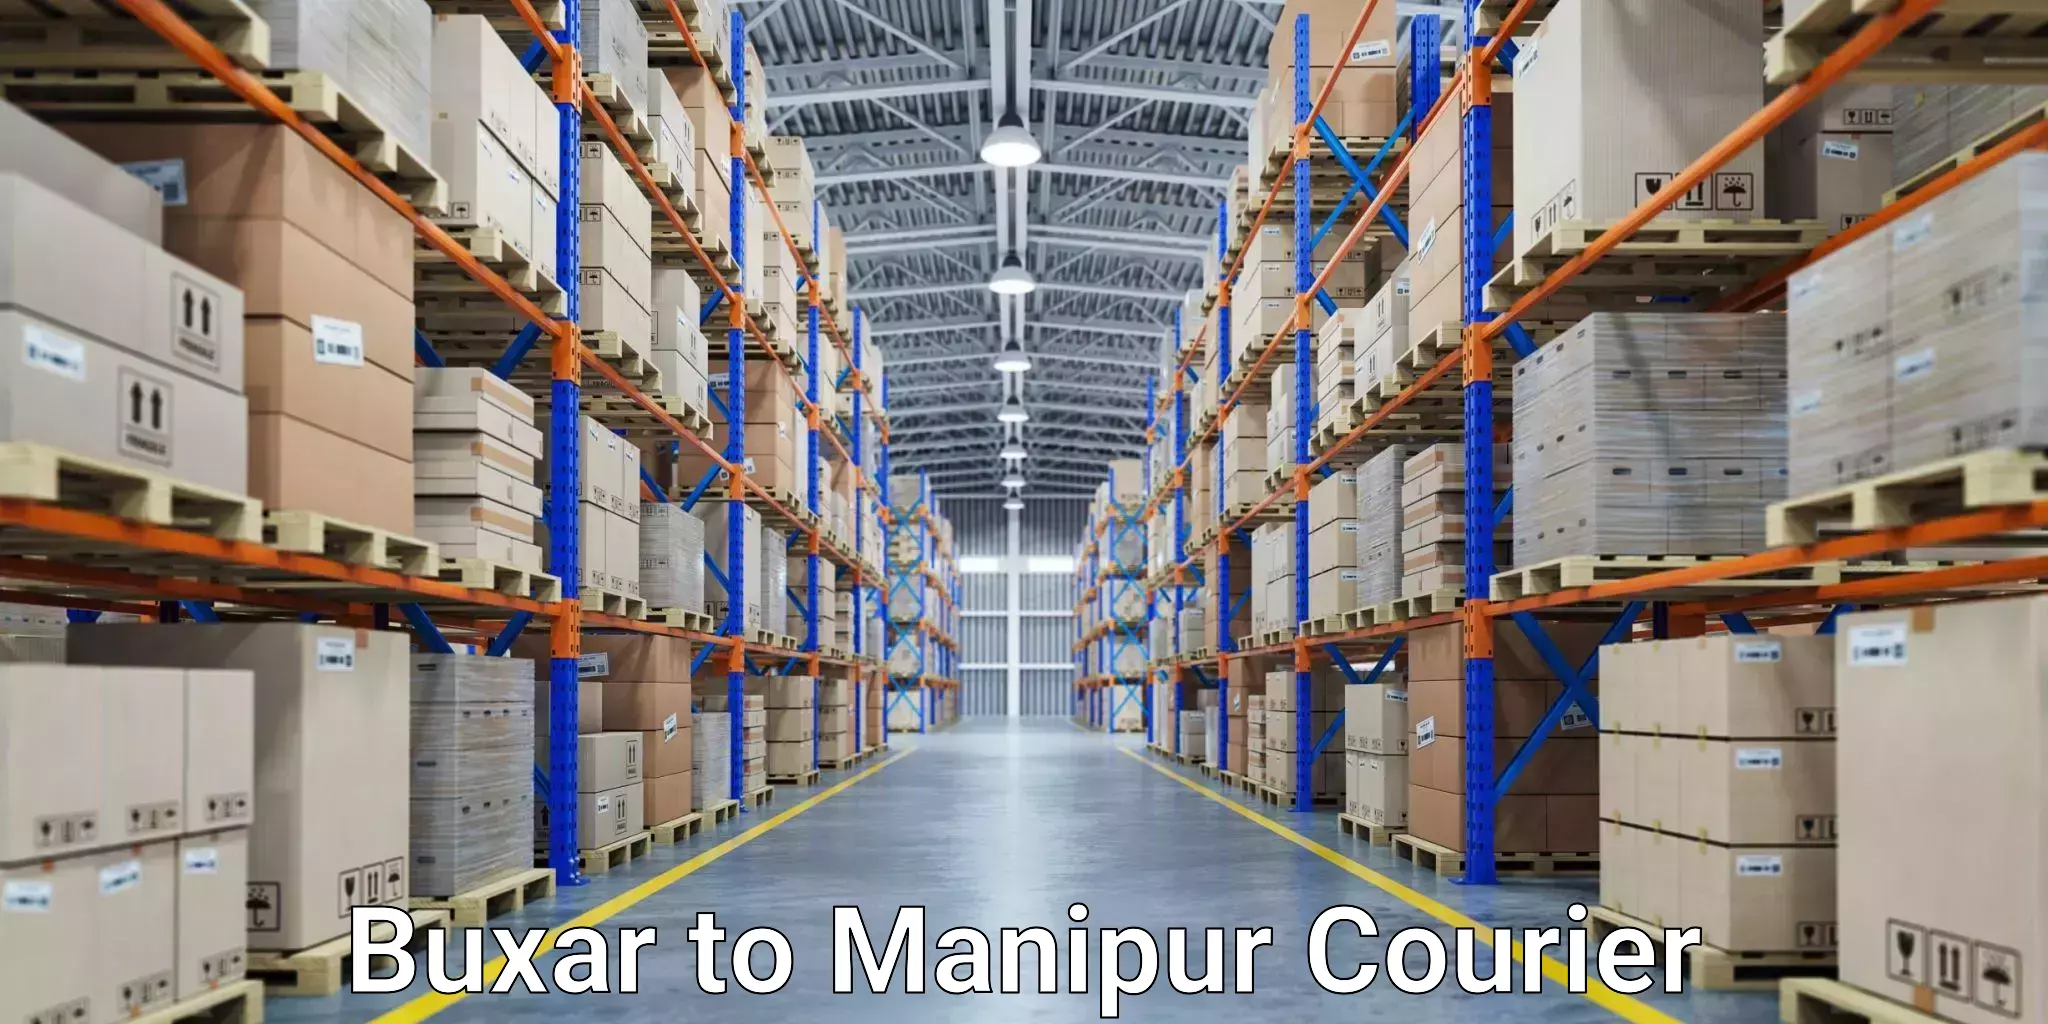 User-friendly delivery service Buxar to Manipur